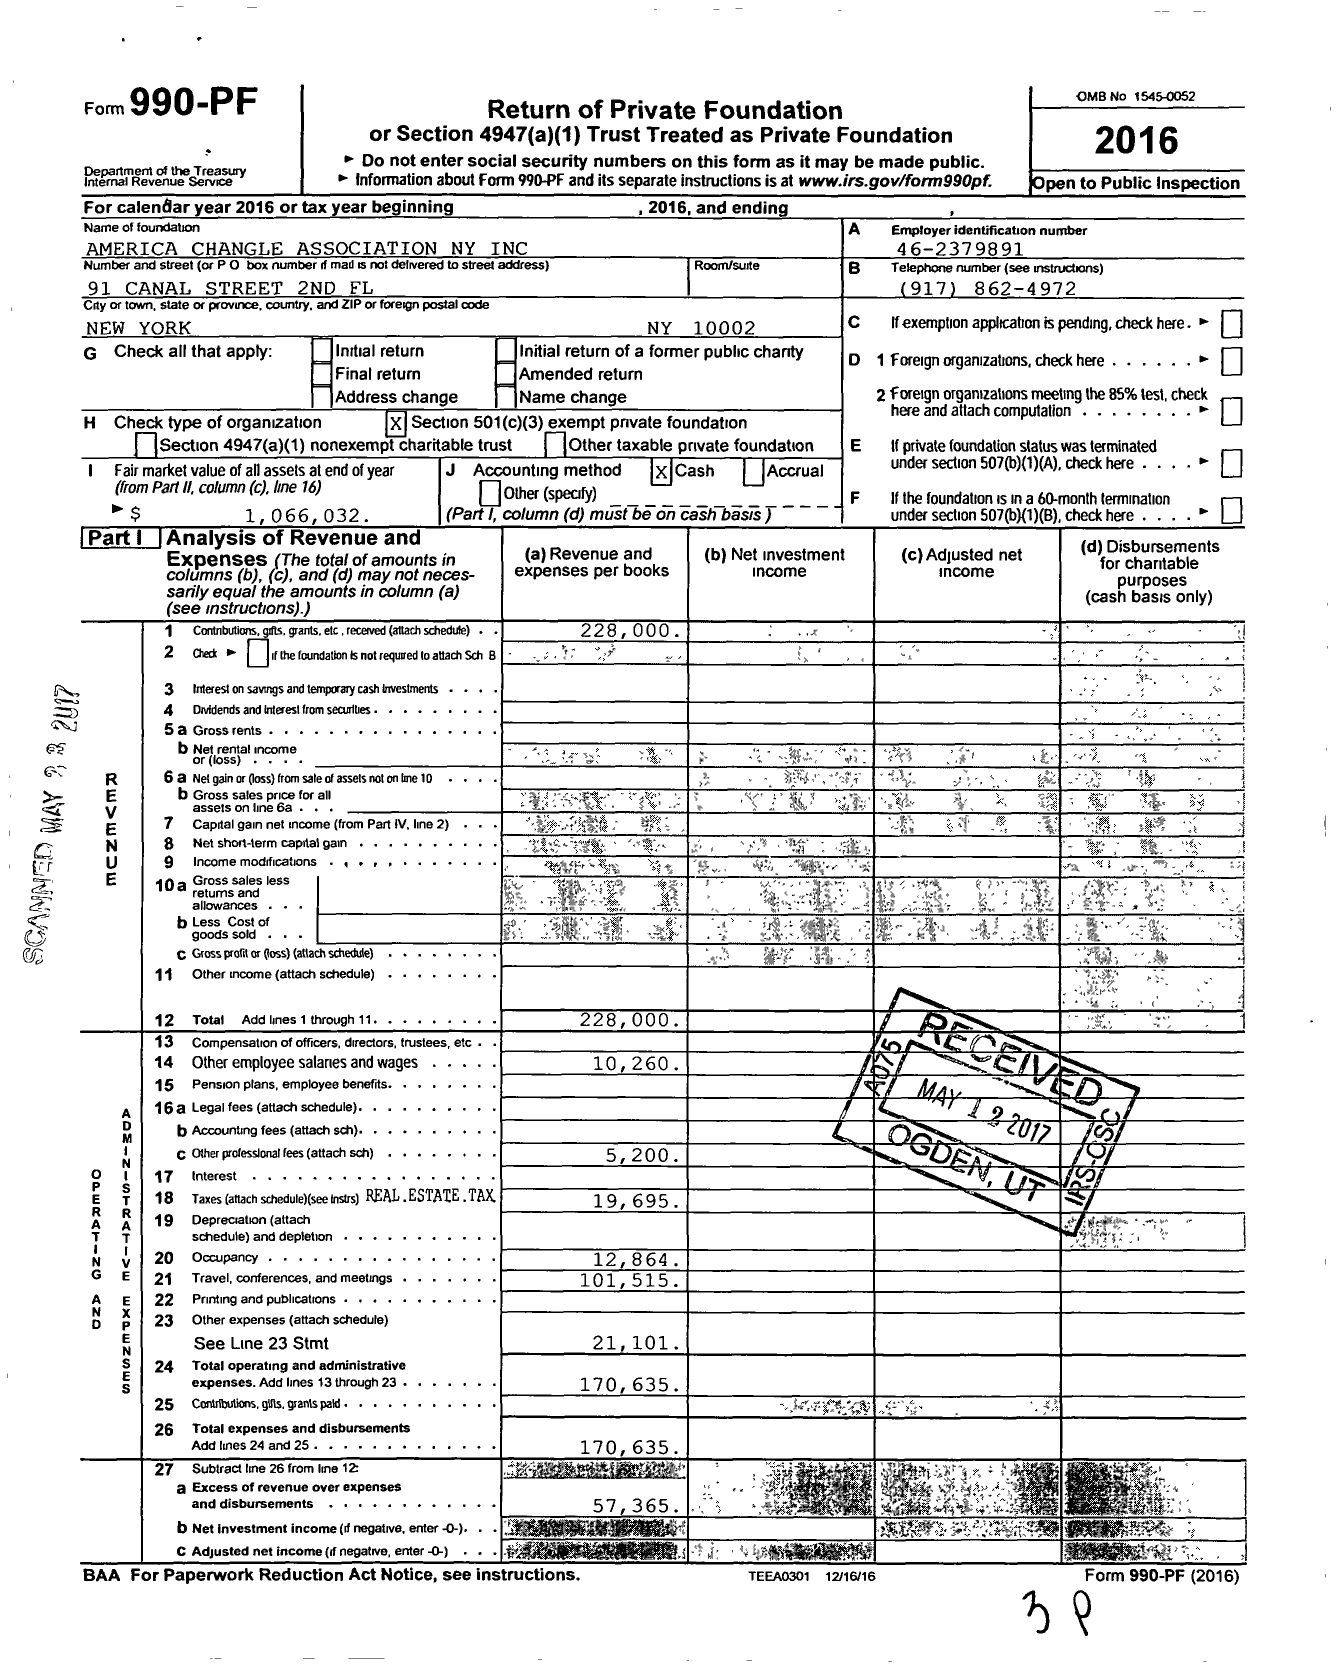 Image of first page of 2016 Form 990PF for America Changle Association Ny